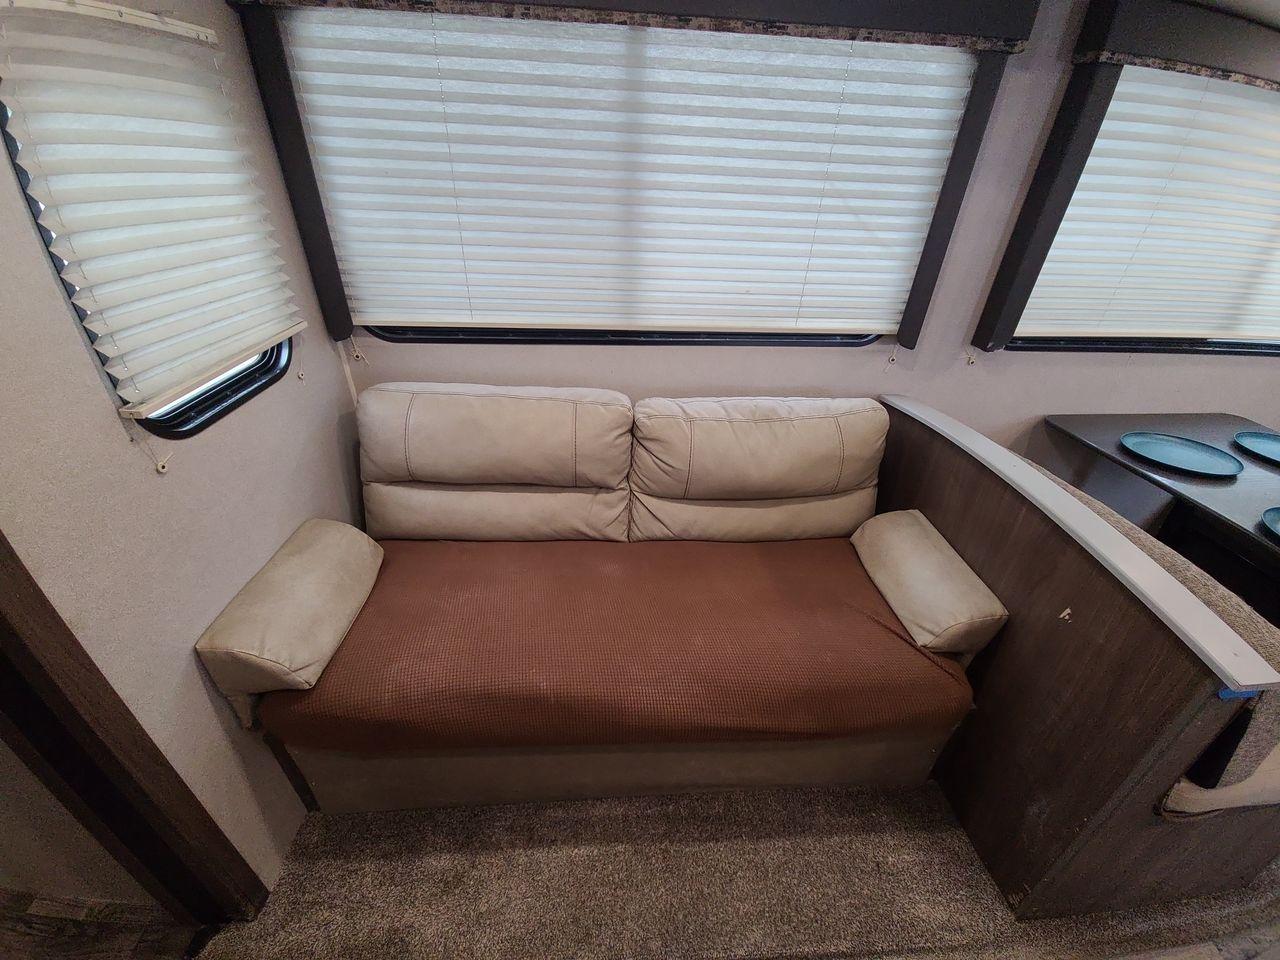 2019 KEYSTONE HIDEOUT 32BHTS (4YDT32F20K3) , Length: 37.67 ft. | Dry Weight: 8,634 lbs. | Gross Weight: 11,200 lbs. | Slides: 3 transmission, located at 4319 N Main Street, Cleburne, TX, 76033, (817) 221-0660, 32.435829, -97.384178 - The 2019 Keystone Hideout 32BHTS is a spacious and family-friendly travel trailer, measuring 37 feet 7 inches in length, 8 feet in width, and 11 feet 4 inches in height, with a dry weight of 8,600 lbs and a GVWR of 11,200 lbs. Constructed with a cambered chassis and a full walk-on roof on a powder-c - Photo #12